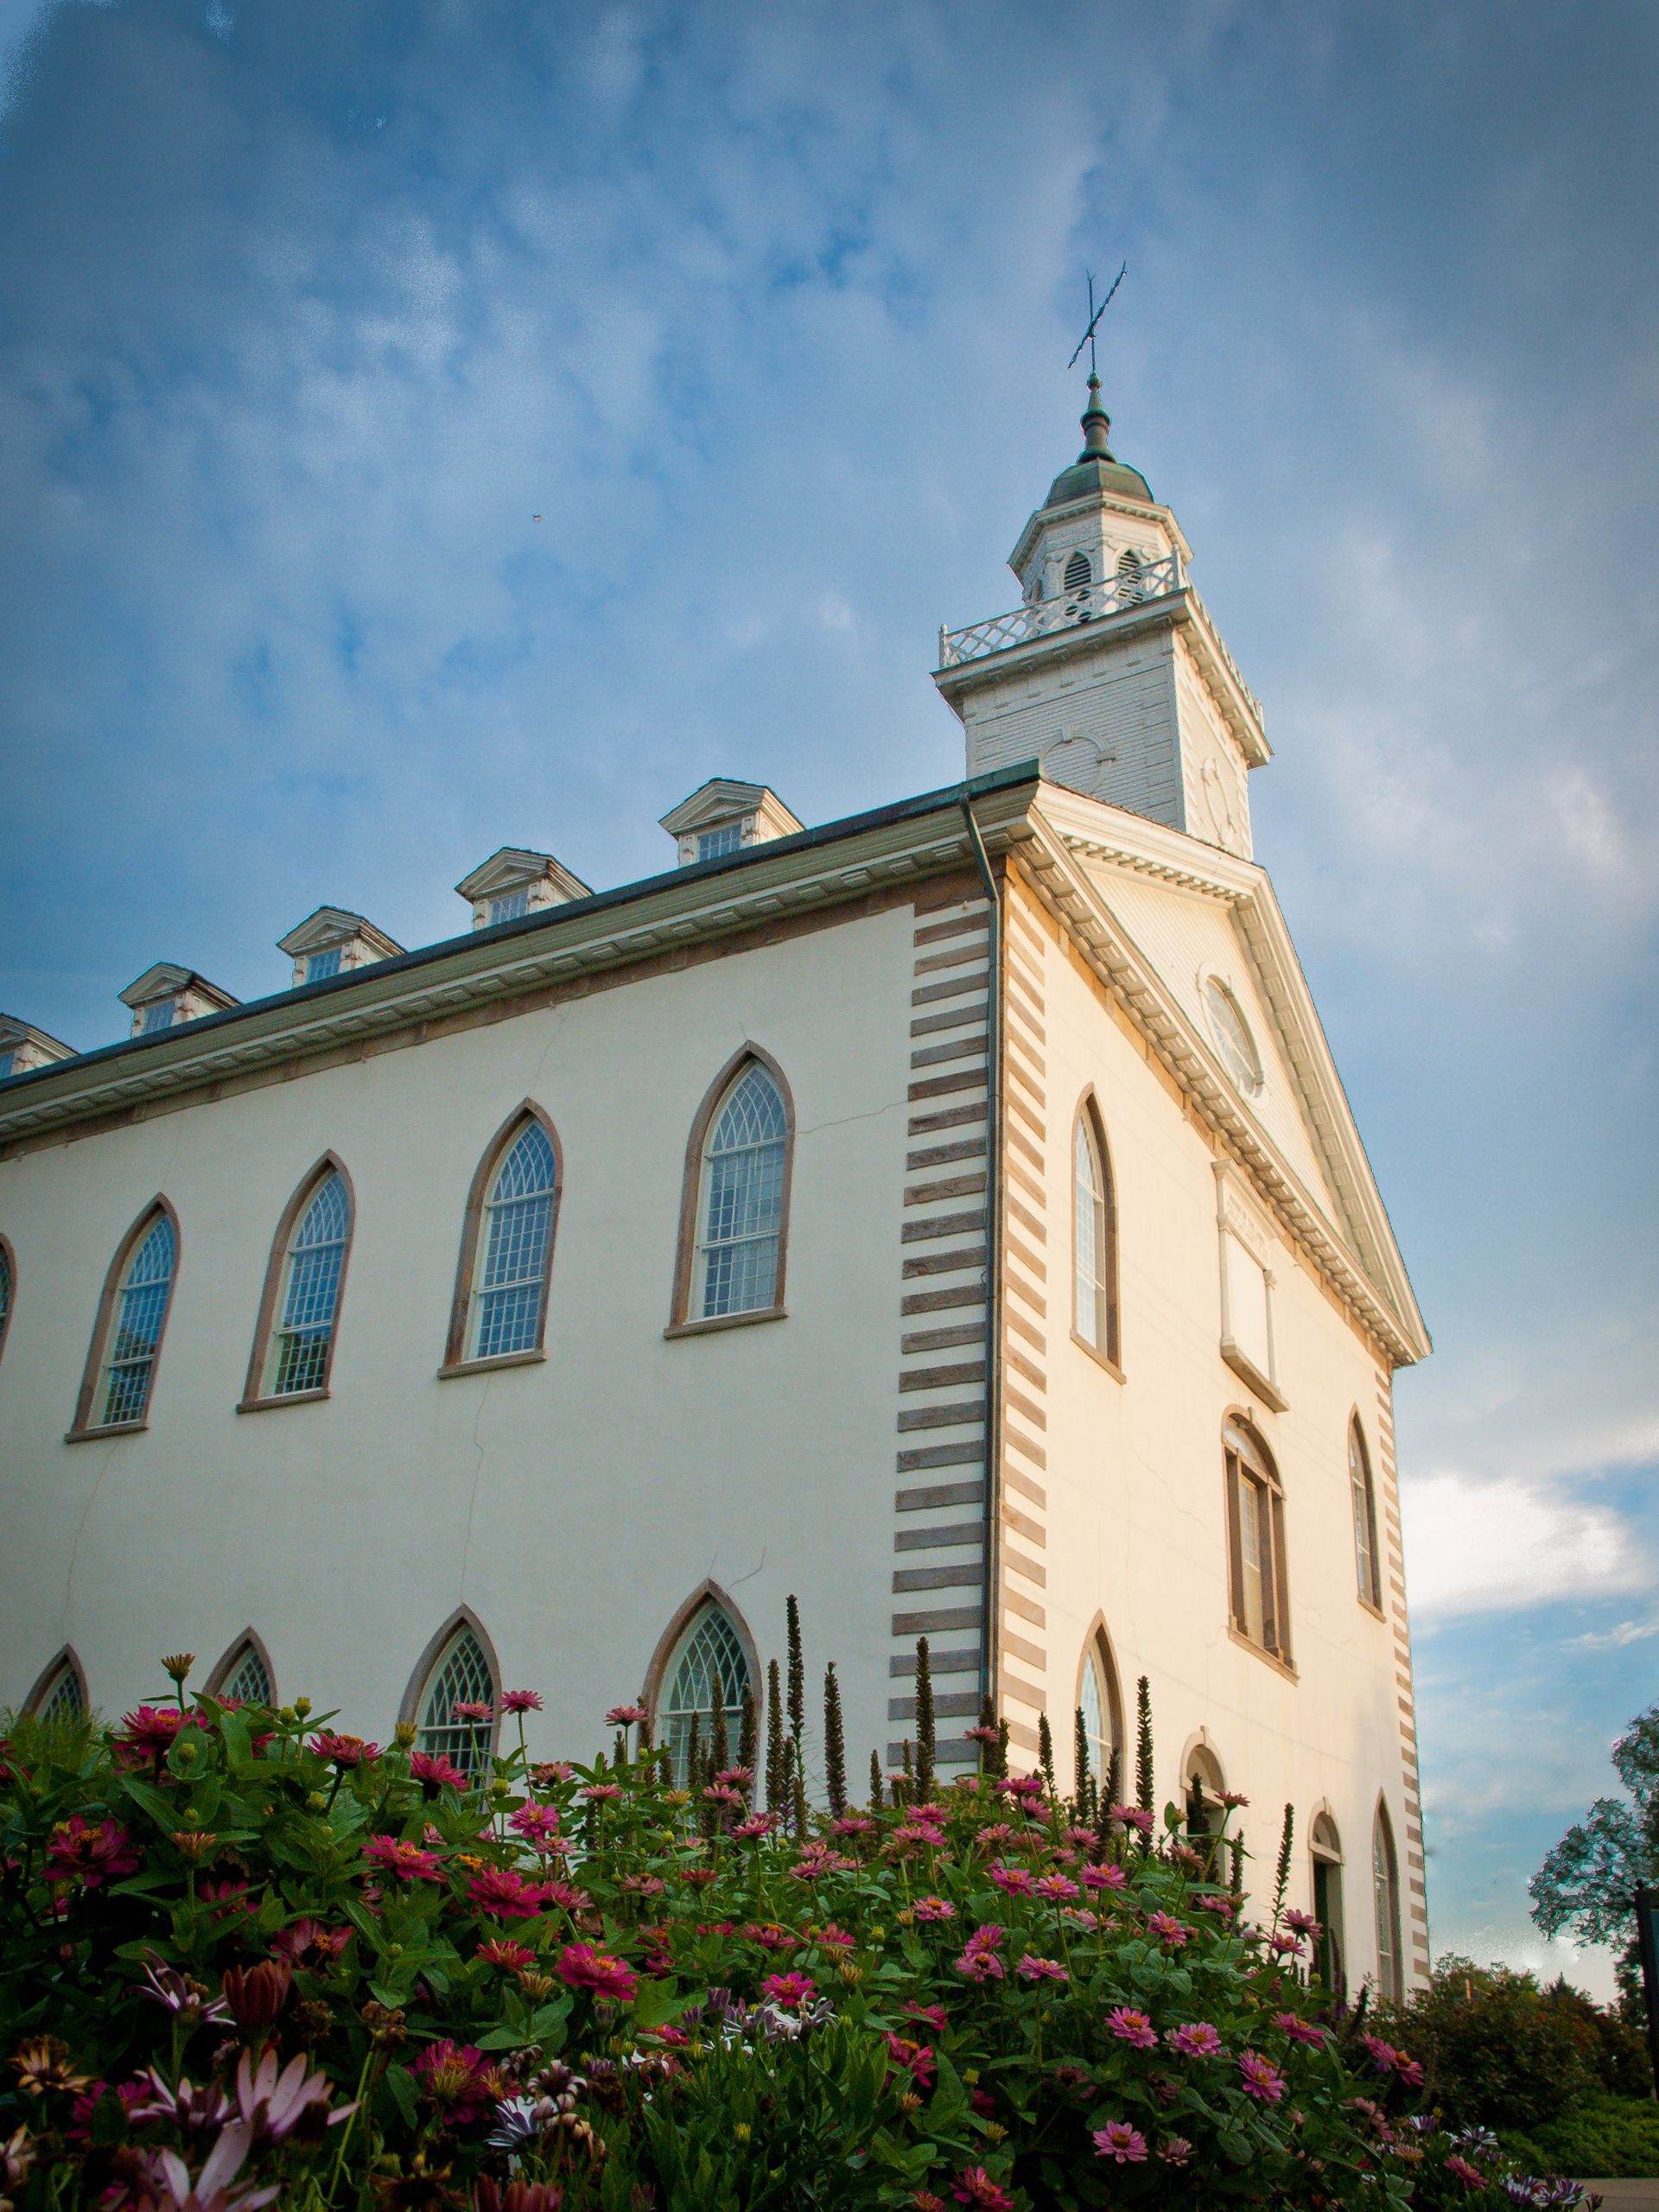 A side view of the Kirtland Temple in sunshine, including scenery.